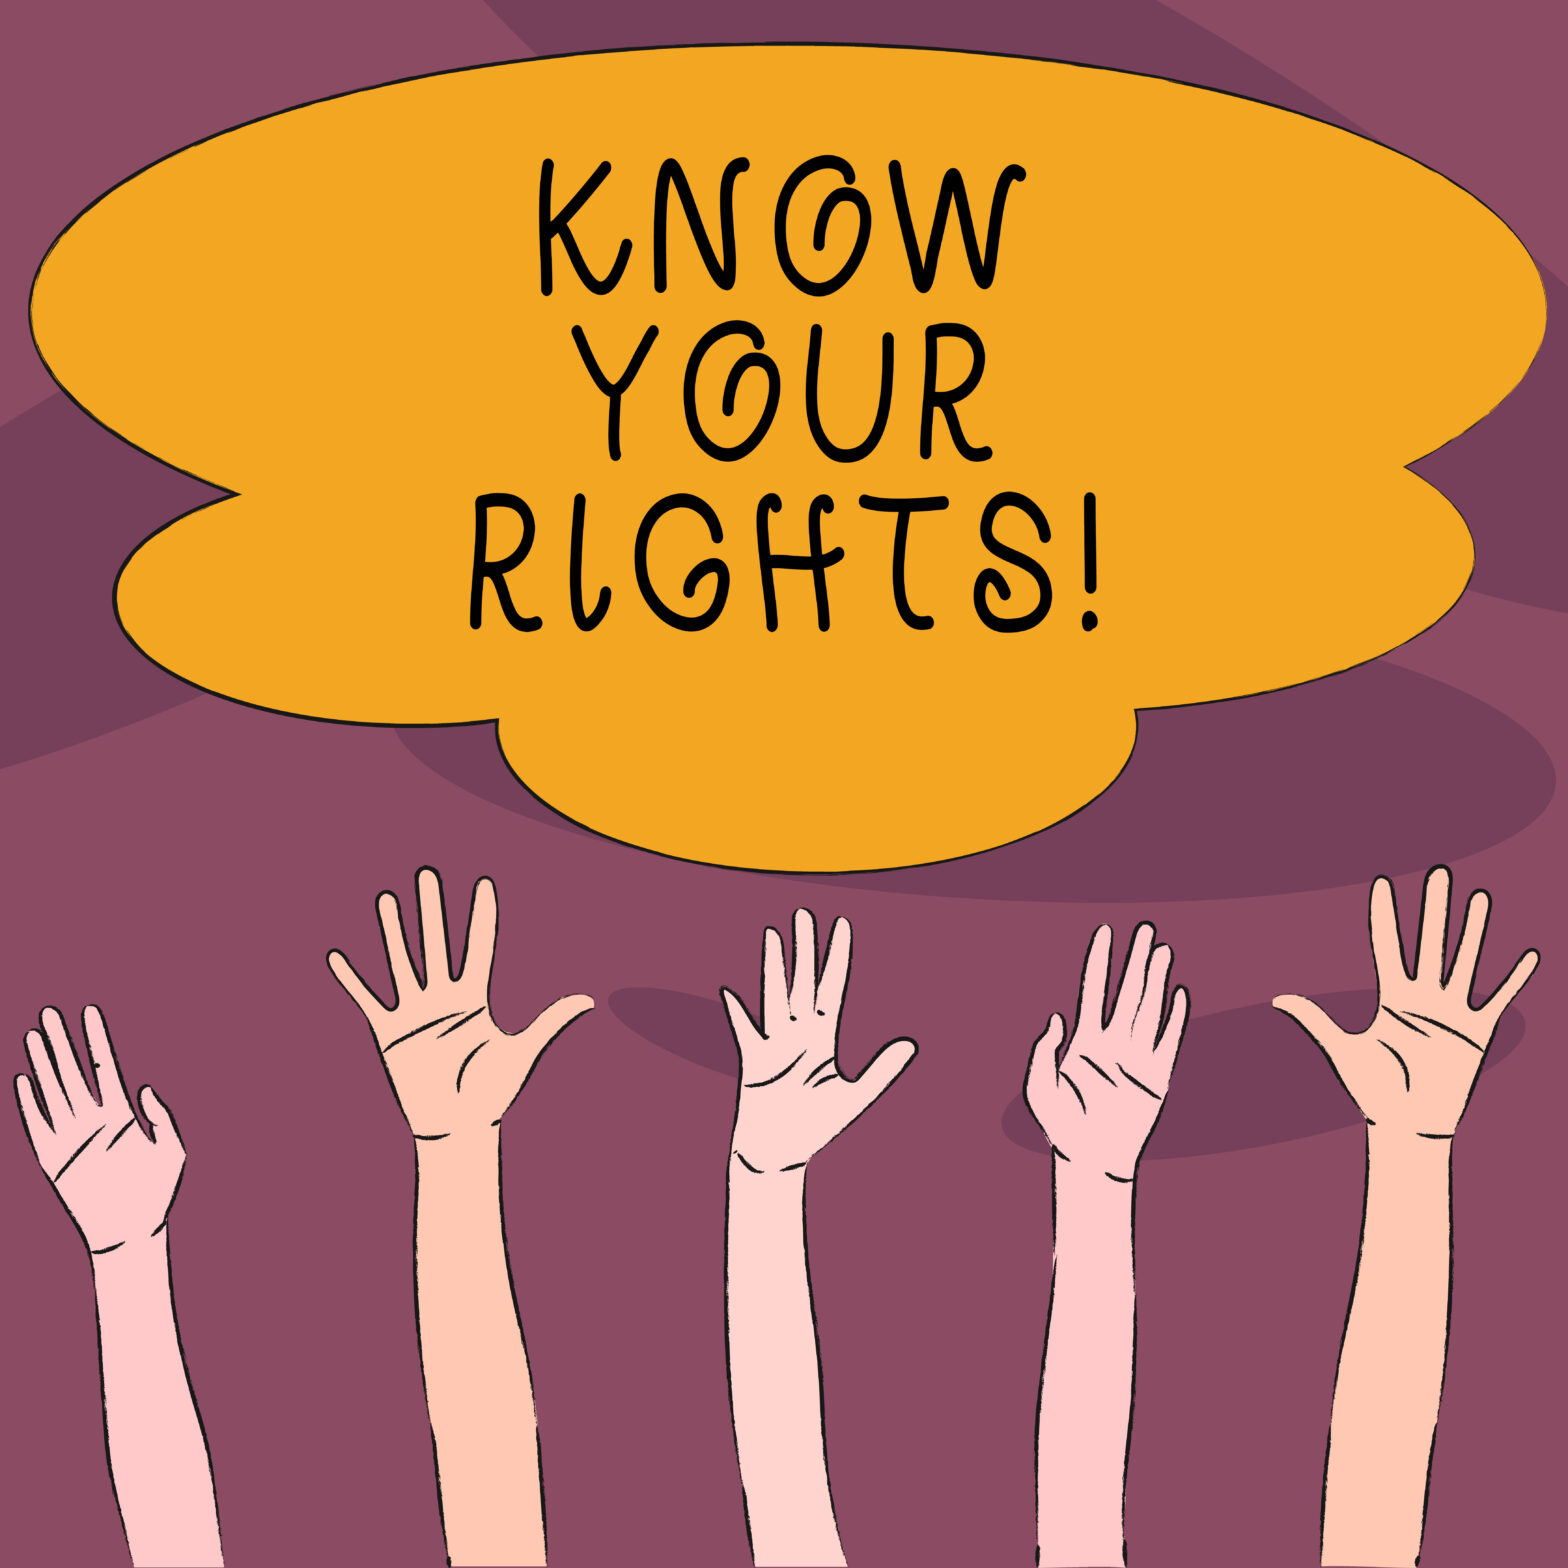 USCRI Announces A New “Know Your Rights” Toolkit